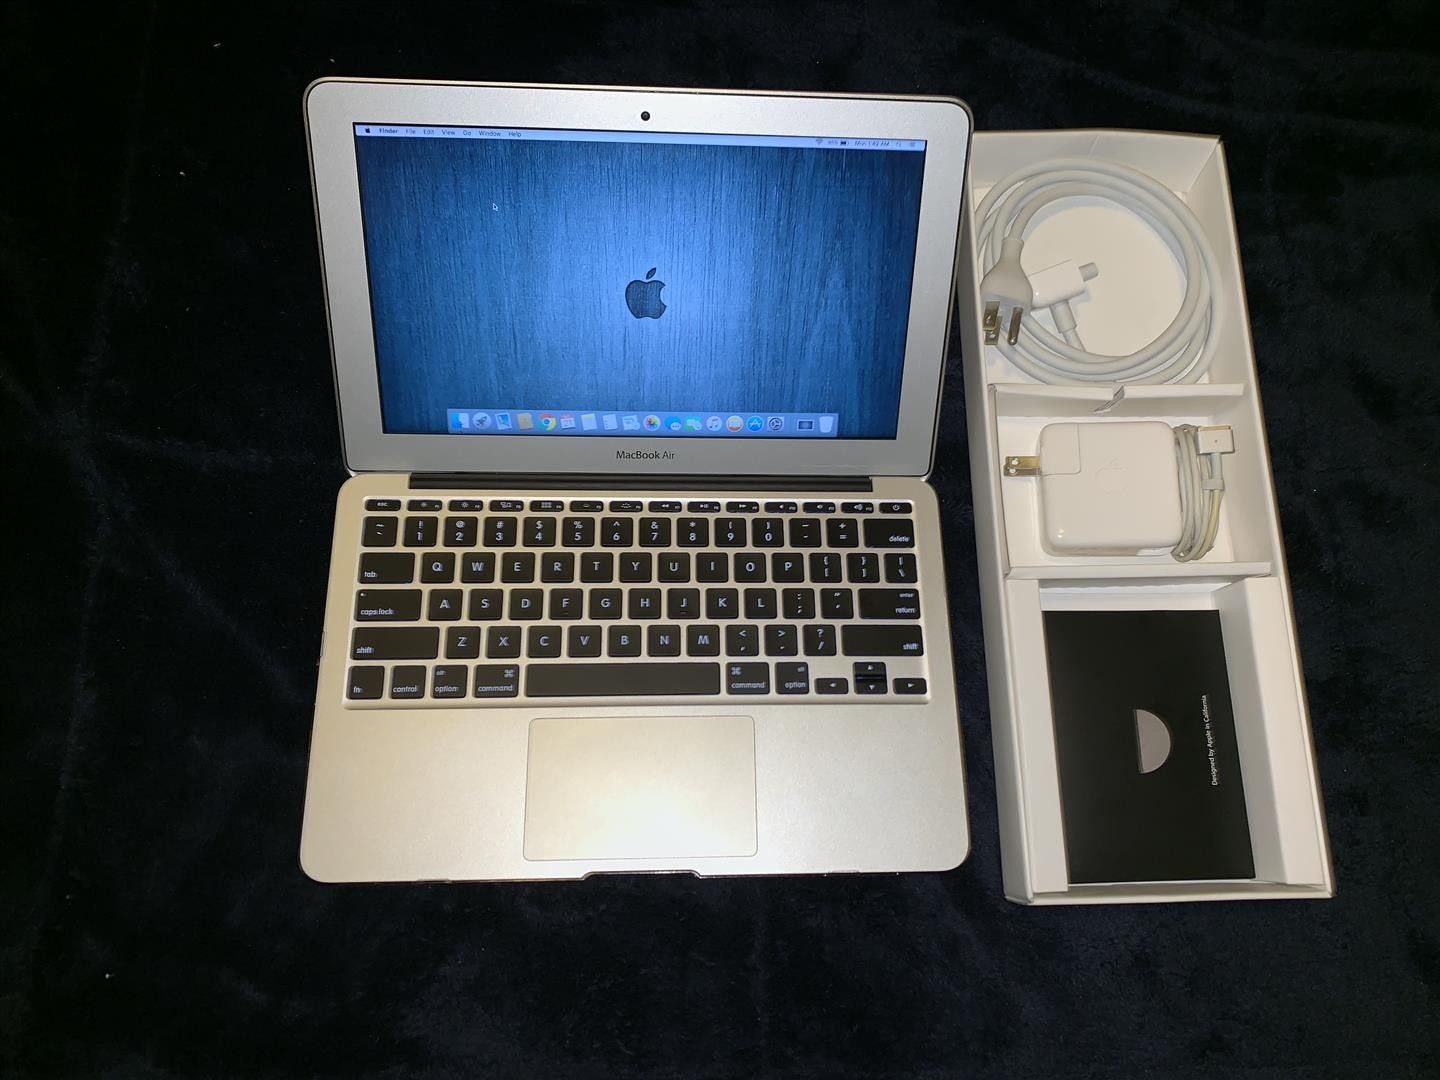 Apple Macbook Air 11.6" i7 CPU 8gb Ram 500gb SSD MINT condition /w Charger & extension cable